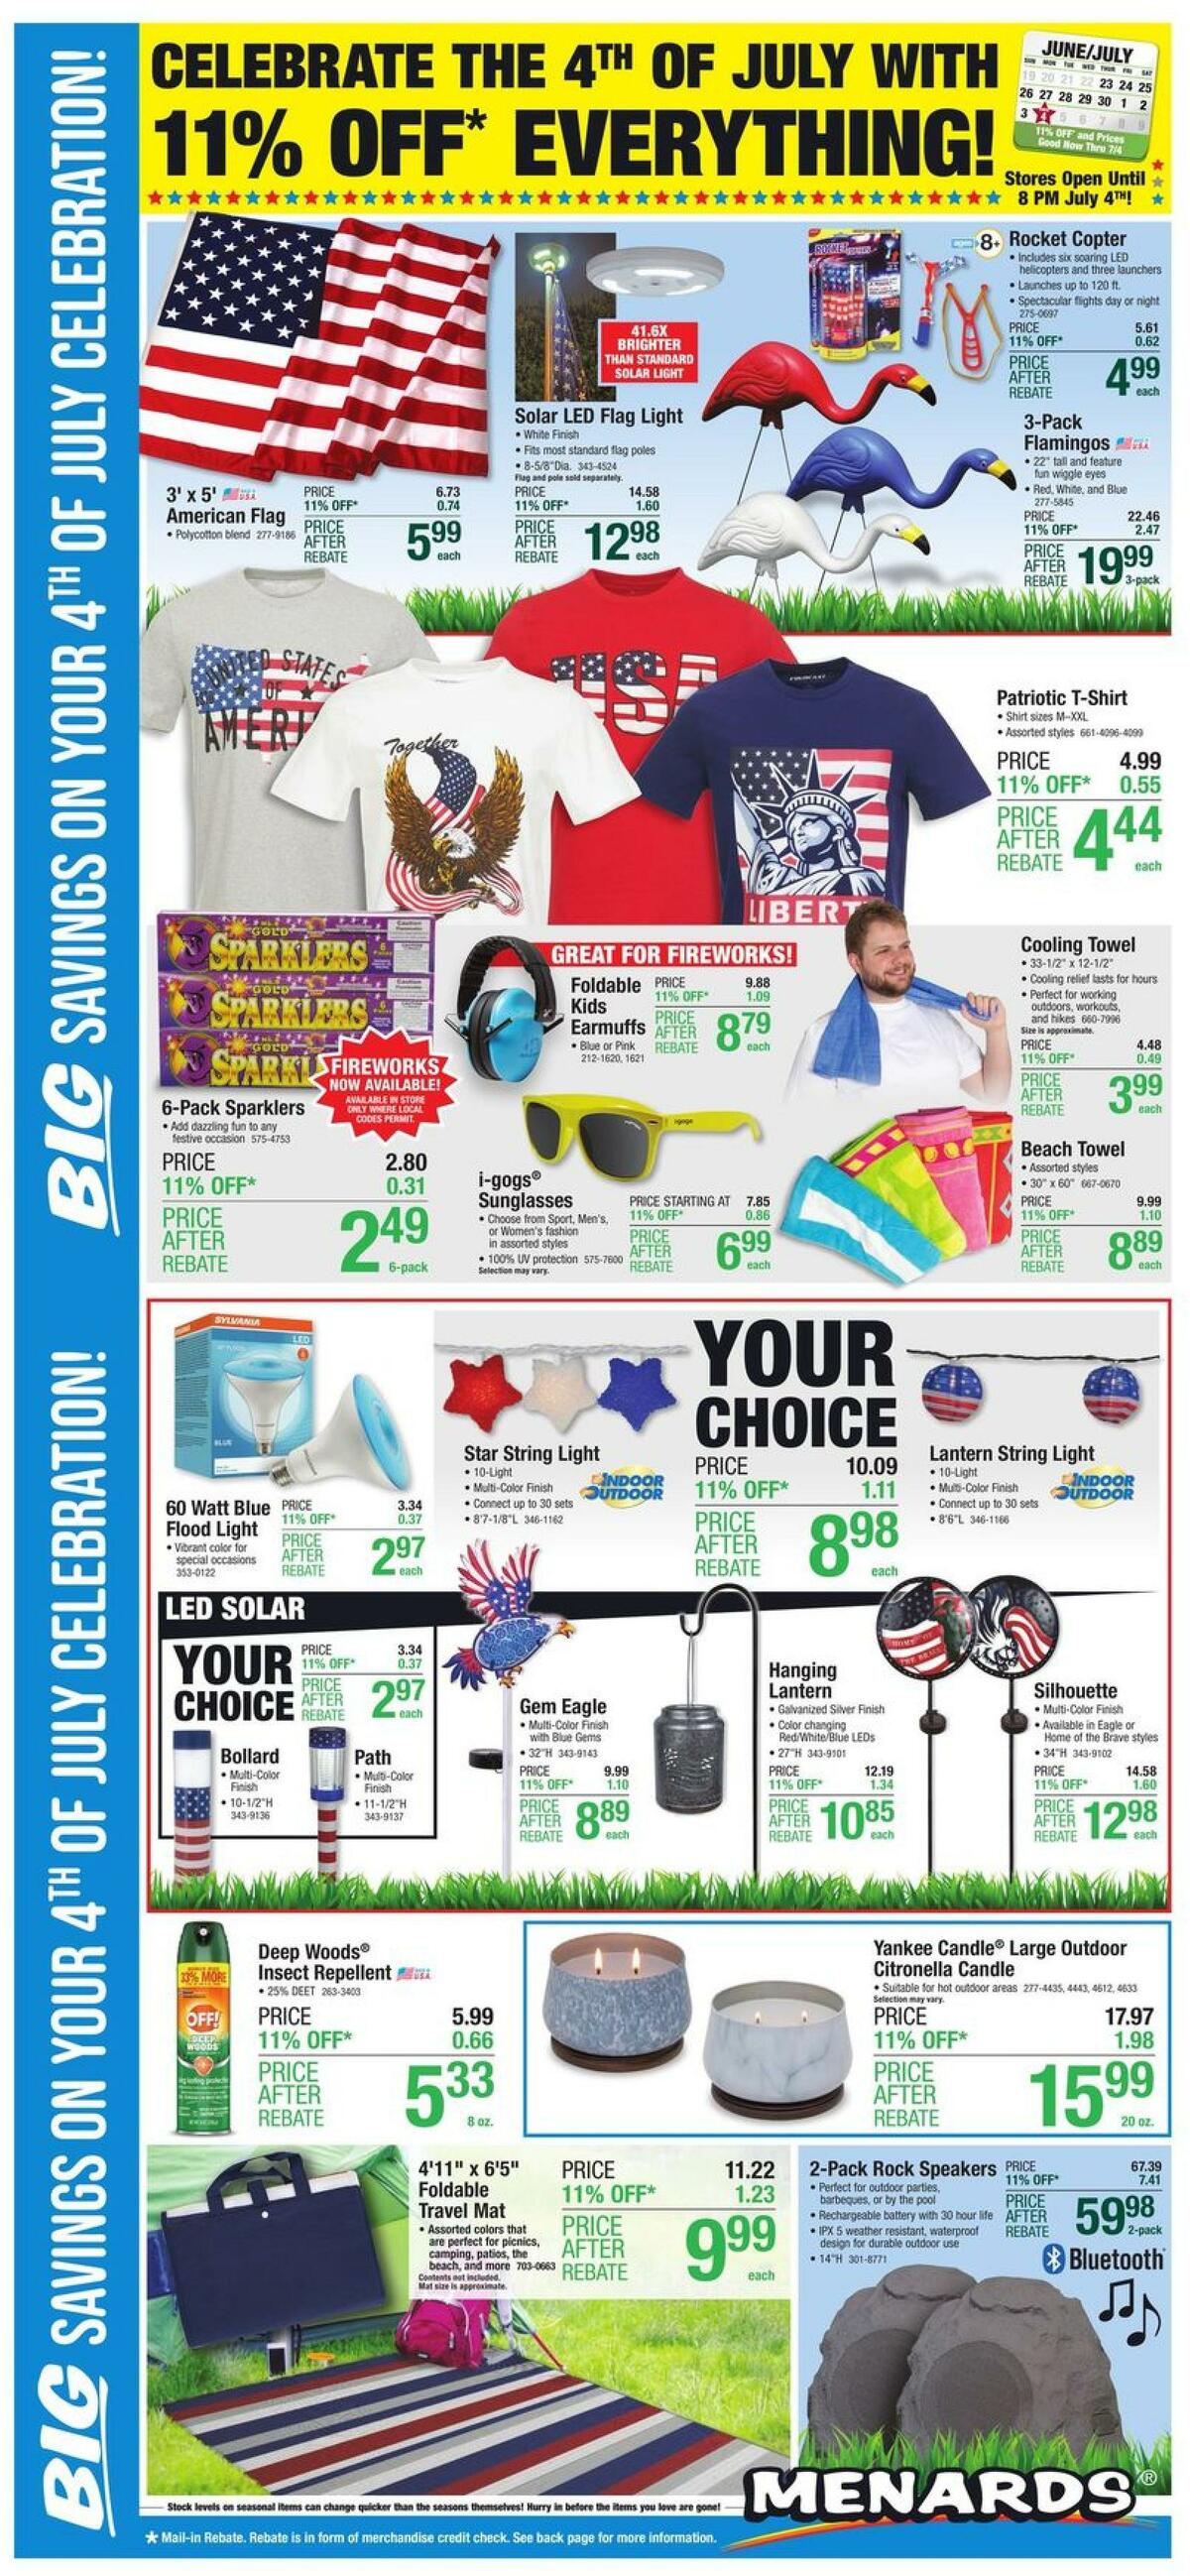 Menards 4TH OF JULY Weekly Ad from June 22